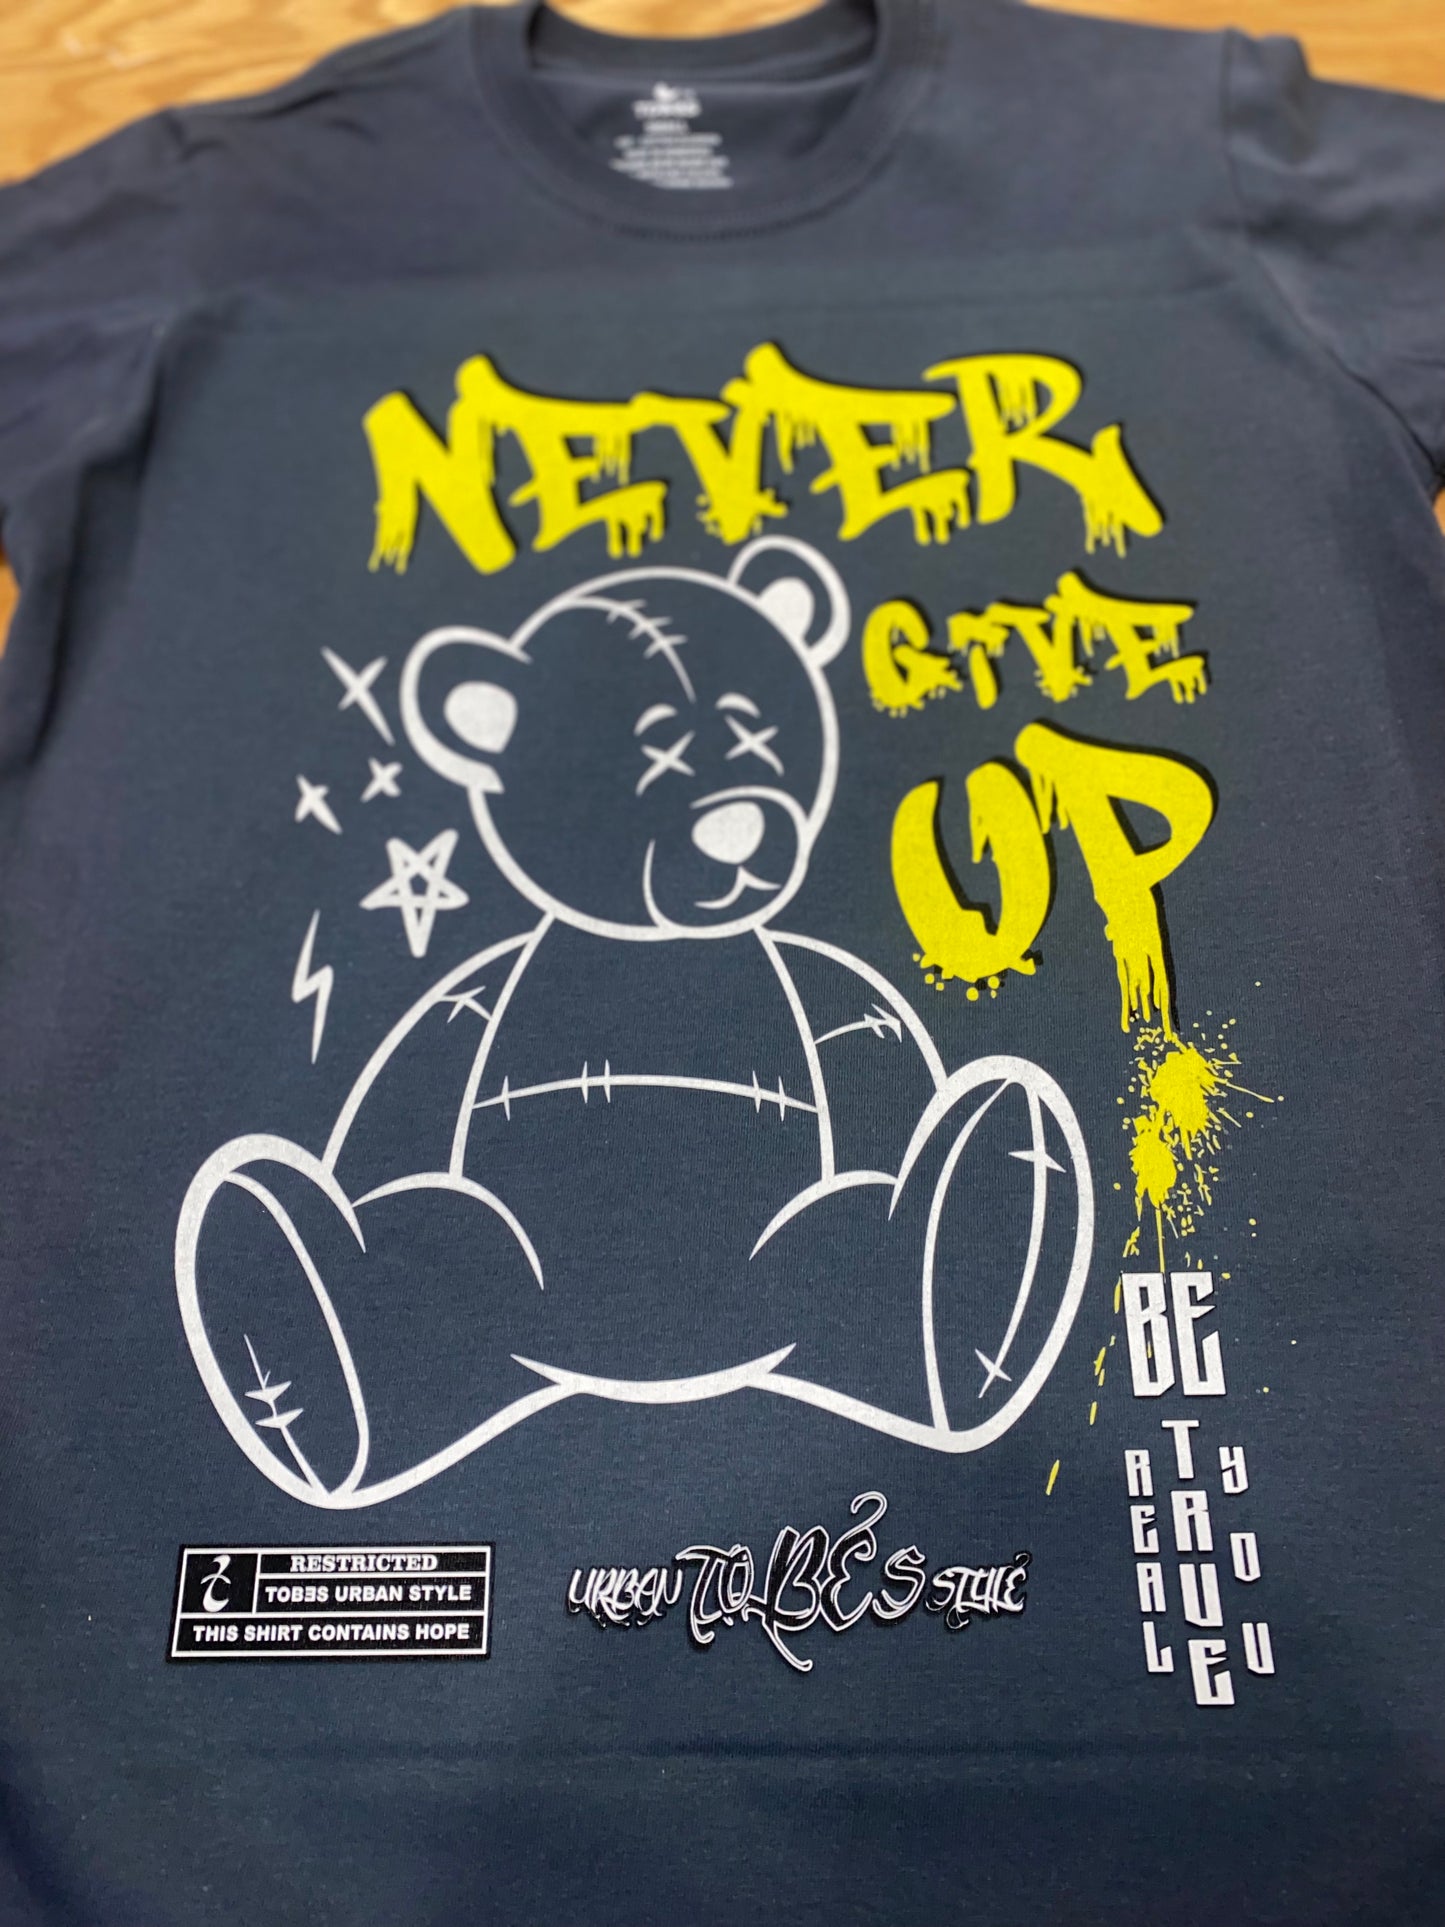 Never Give up - T-Shirt